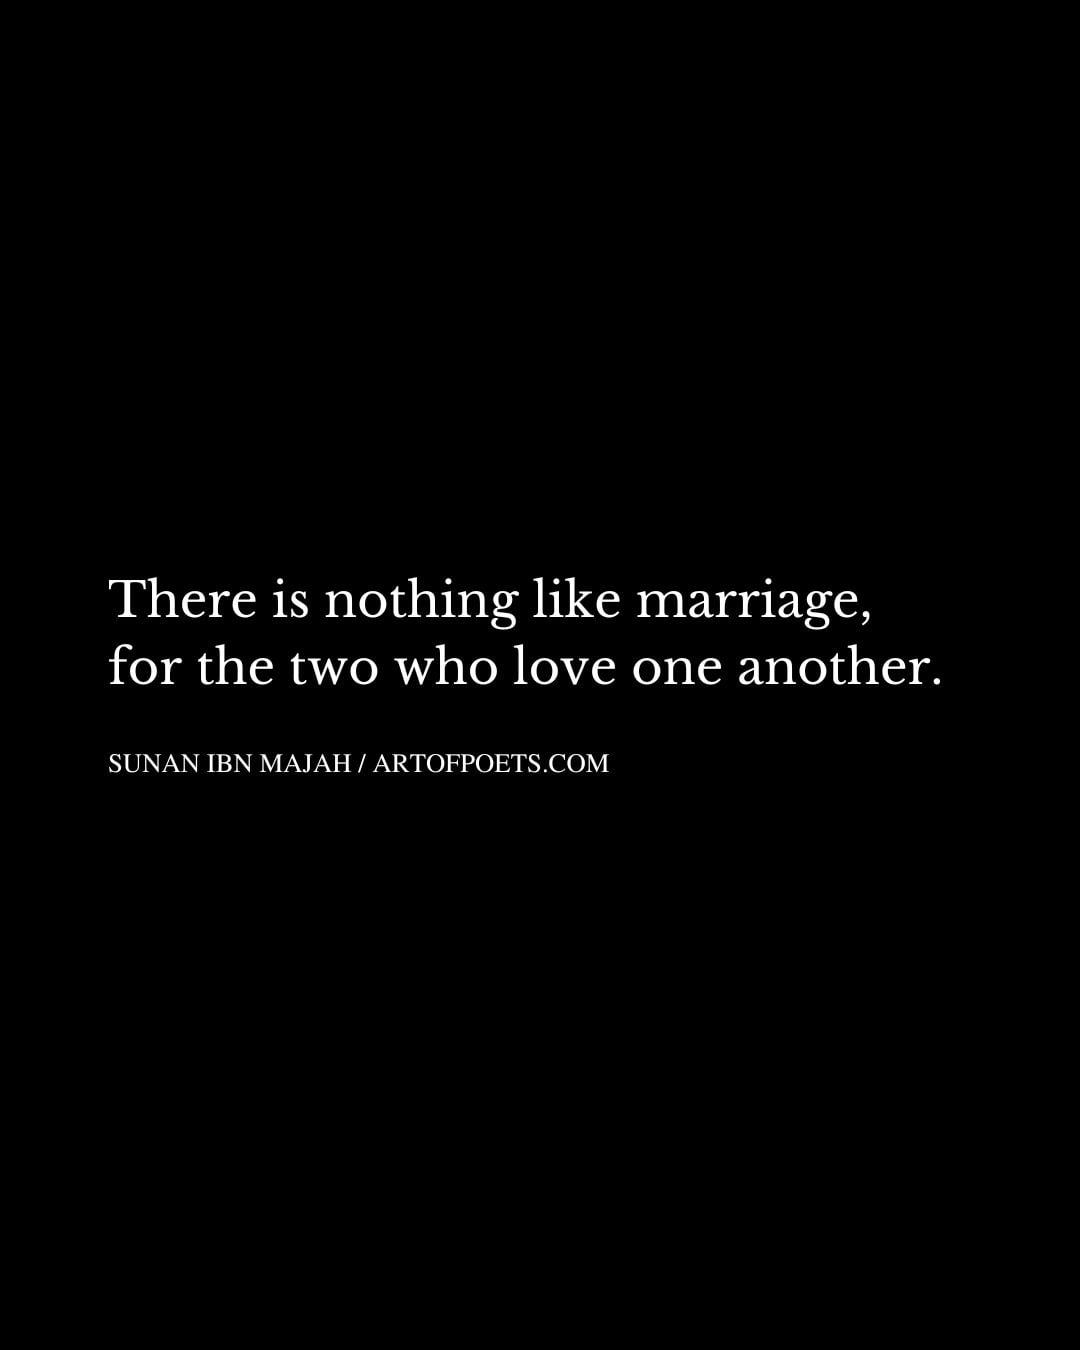 There is nothing like marriage for the two who love one another